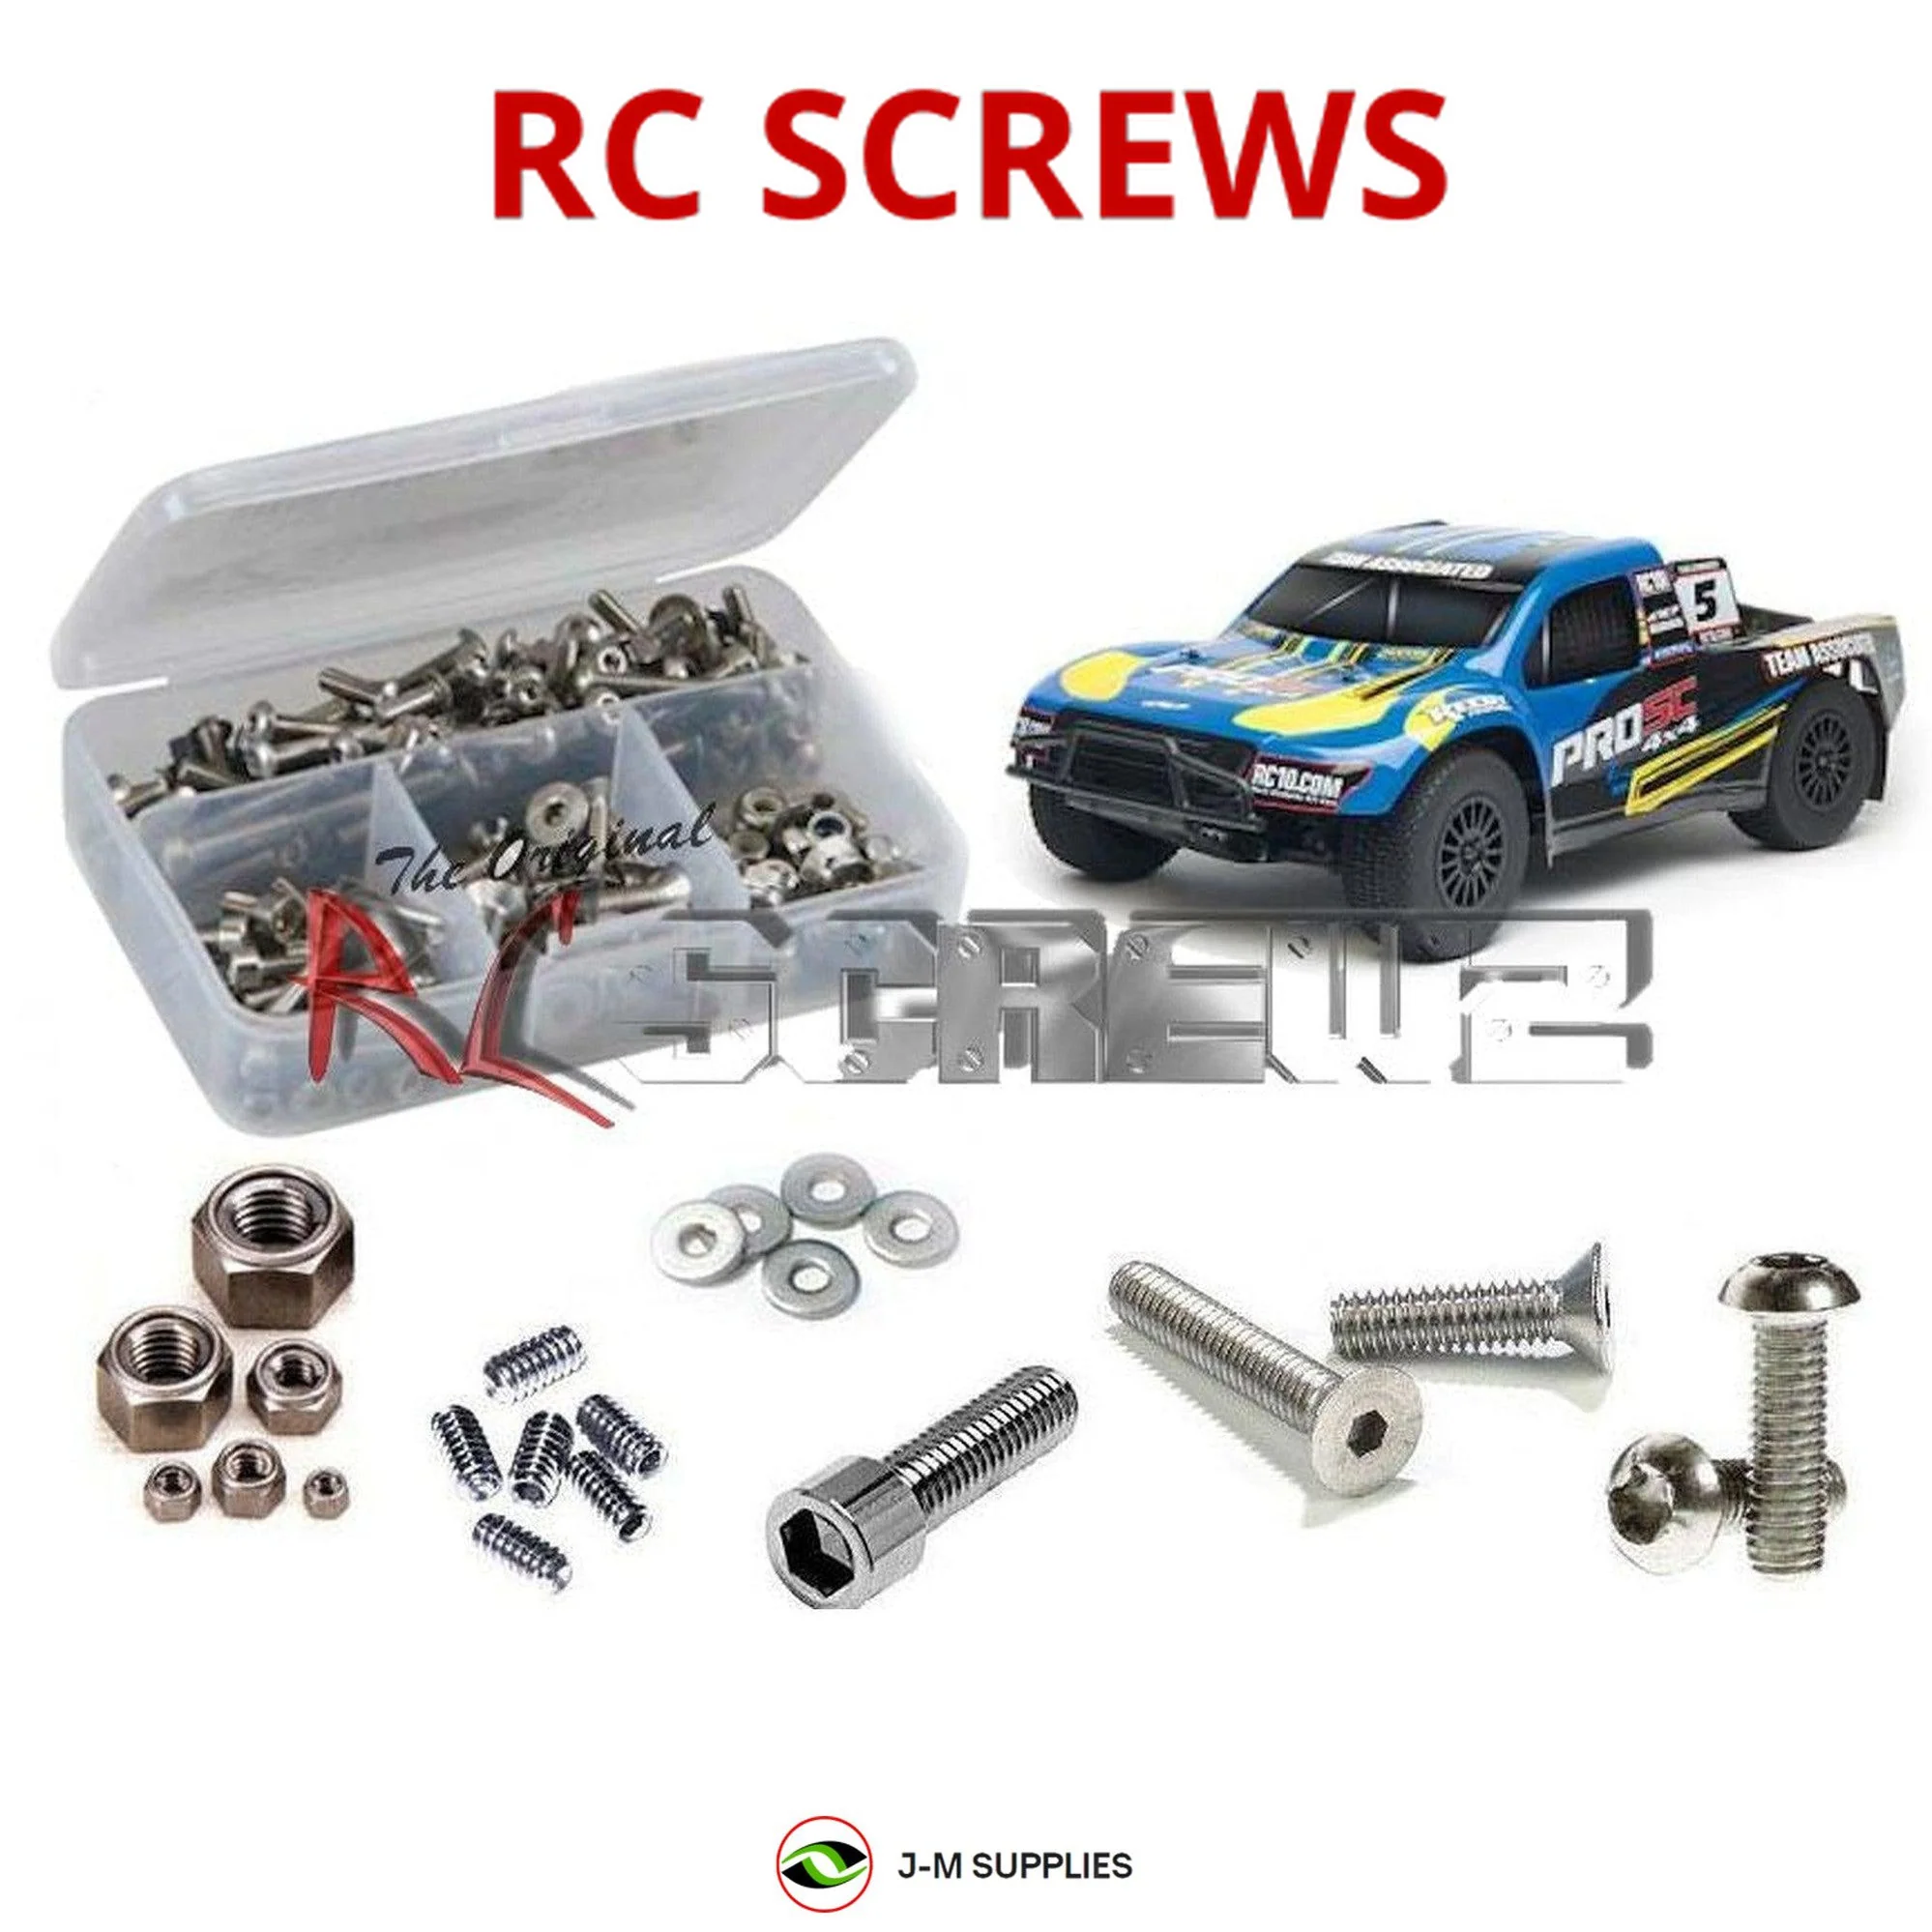 RCScrewZ Stainless Screw Kit+ ass067 for Associated Pro SC 4x4 #7062 (Spares) - Picture 1 of 12